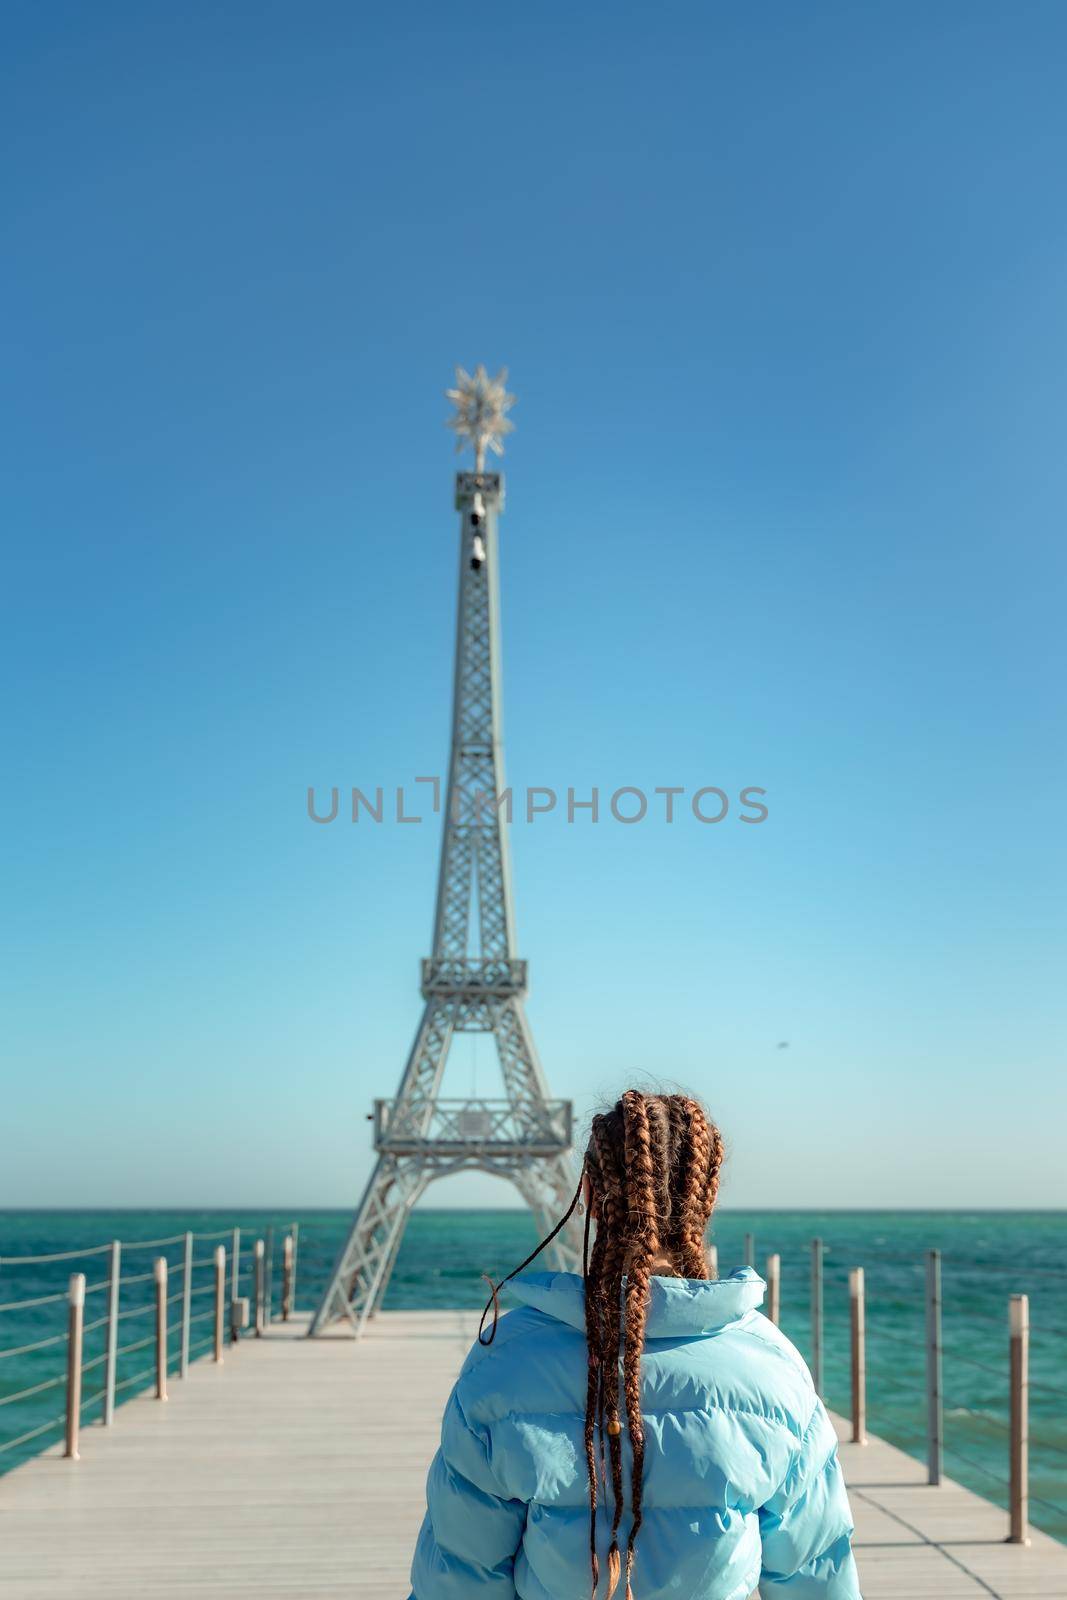 Large model of the Eiffel Tower on the beach. A woman walks along the pier towards the tower, wearing a blue jacket and white jeans